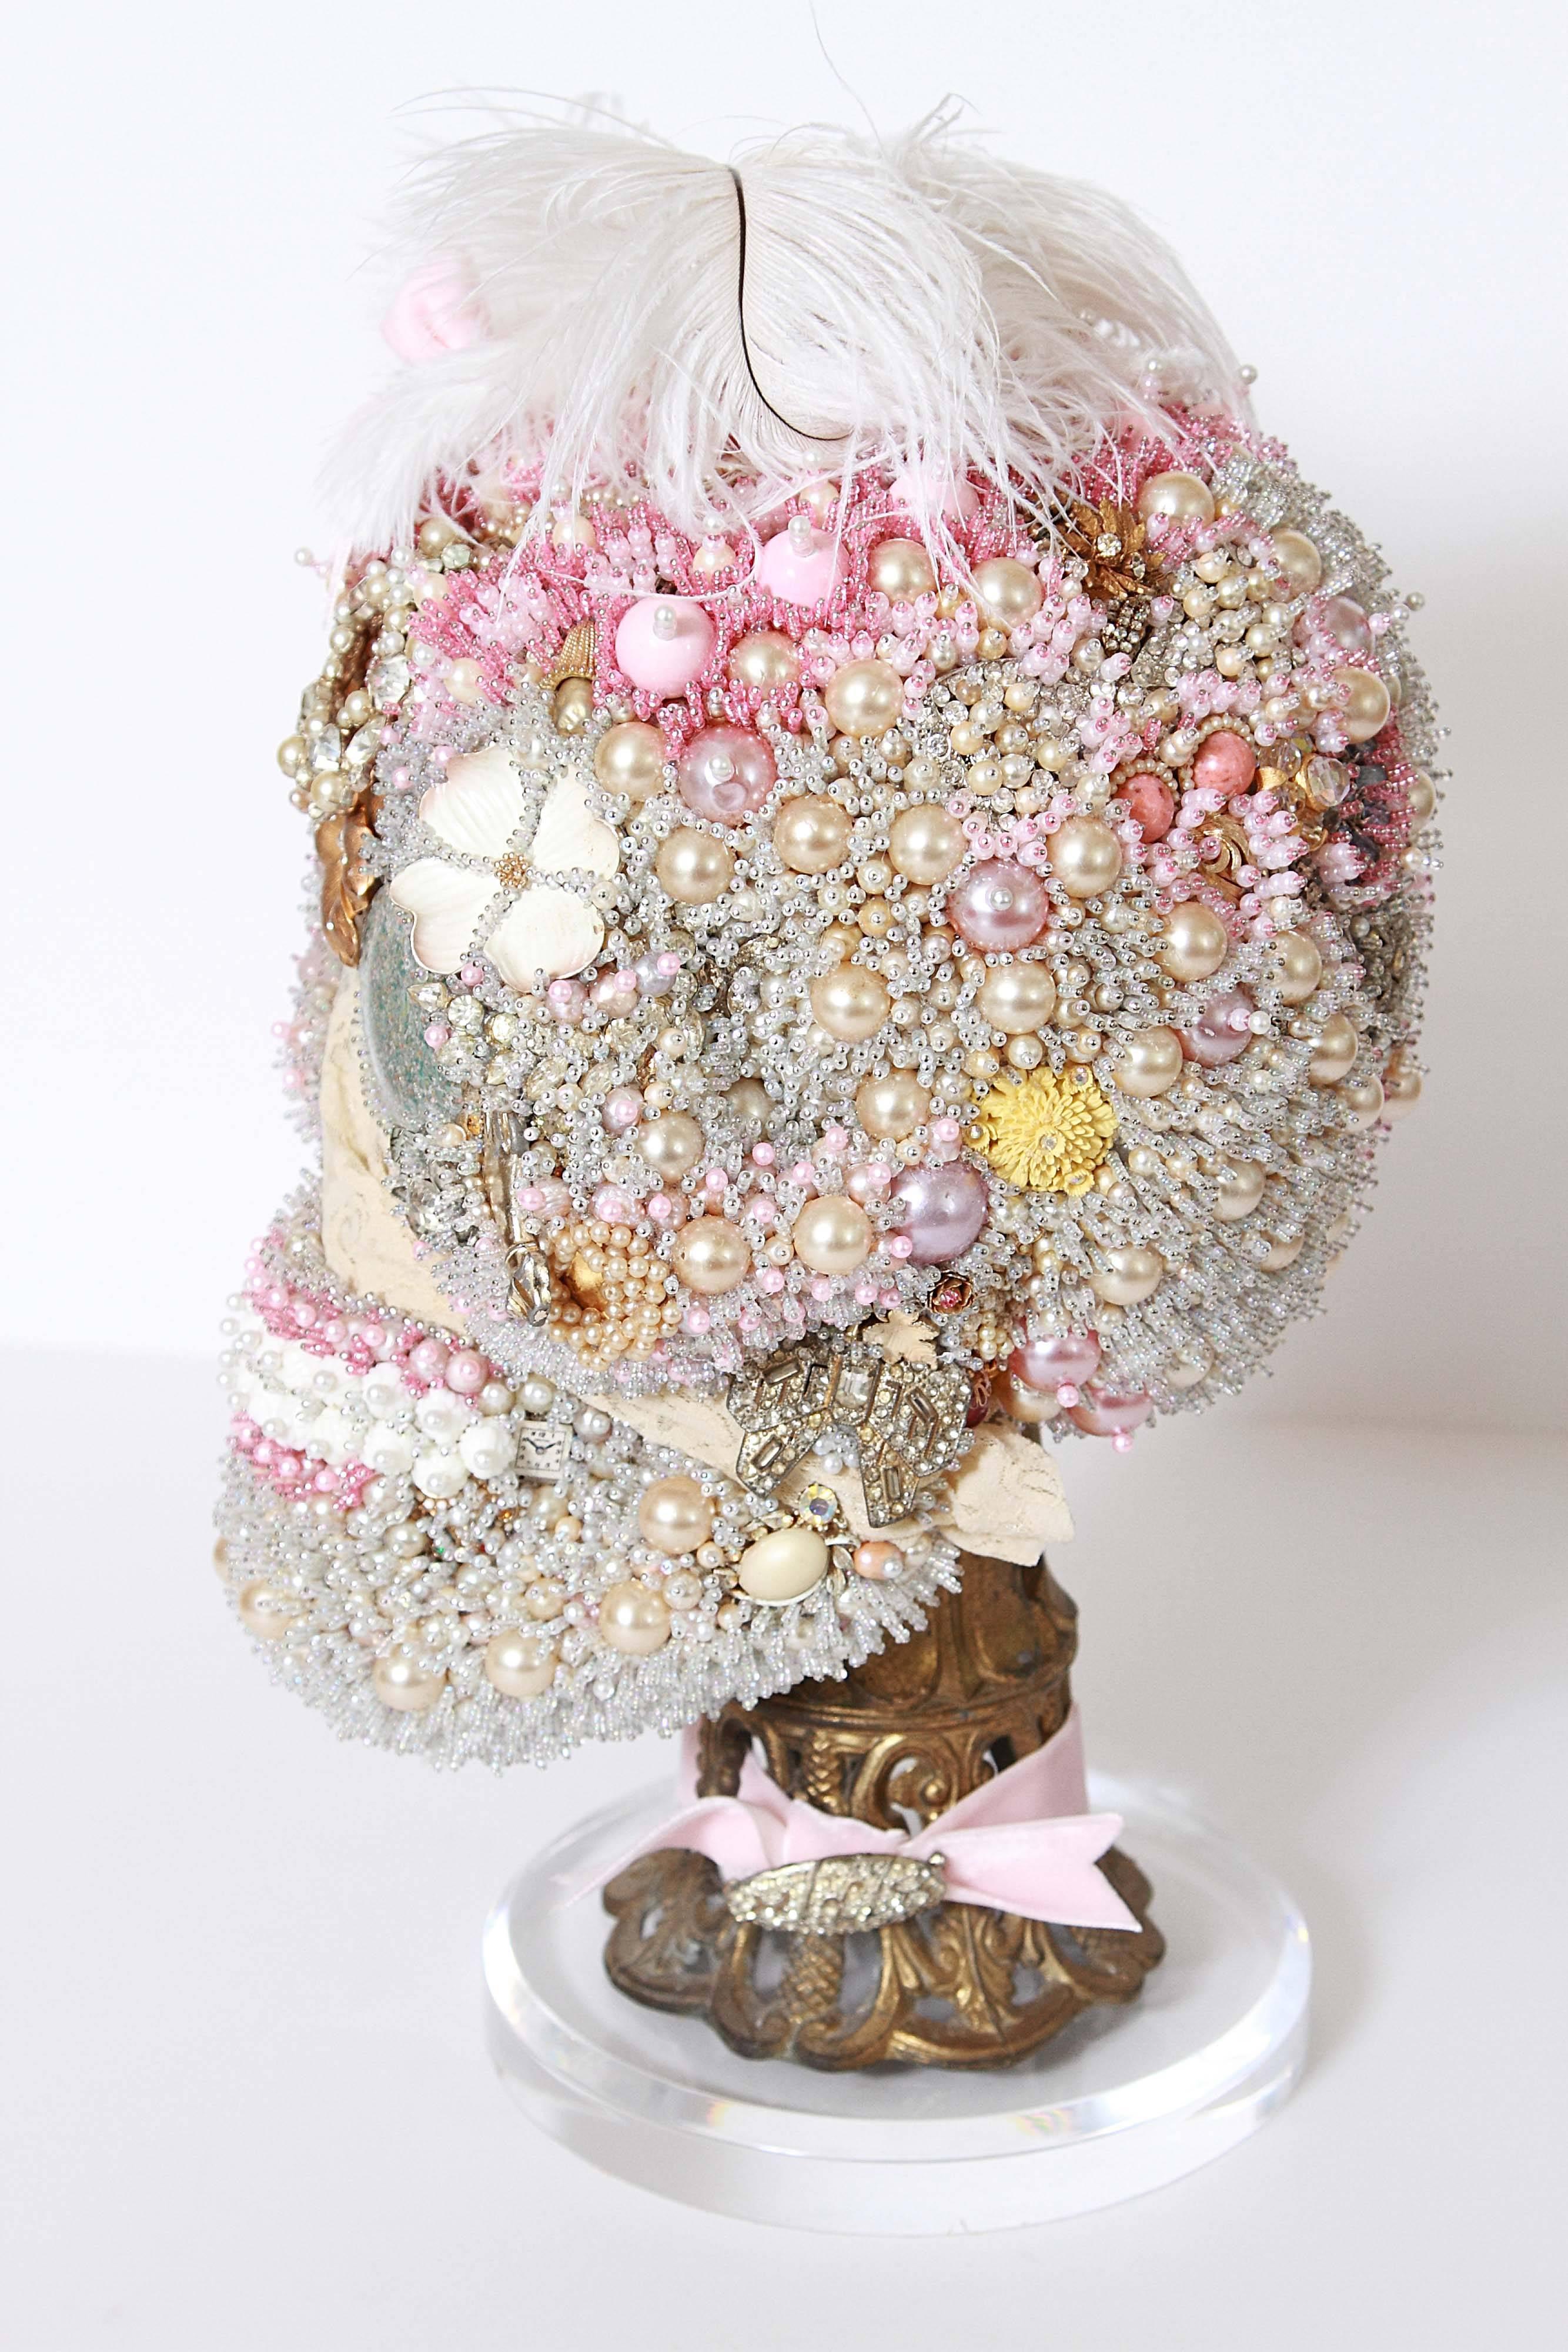 La Tête de Marie Antoinette by Peyton Hayslip.
Date of Fabrication: 2016.

This one of a kind, handcrafted Marie Antoinette beaded sculpture is made with vintage beads, brooches, cufflinks, and pearls, Italian porcelain rose, art glass, seed